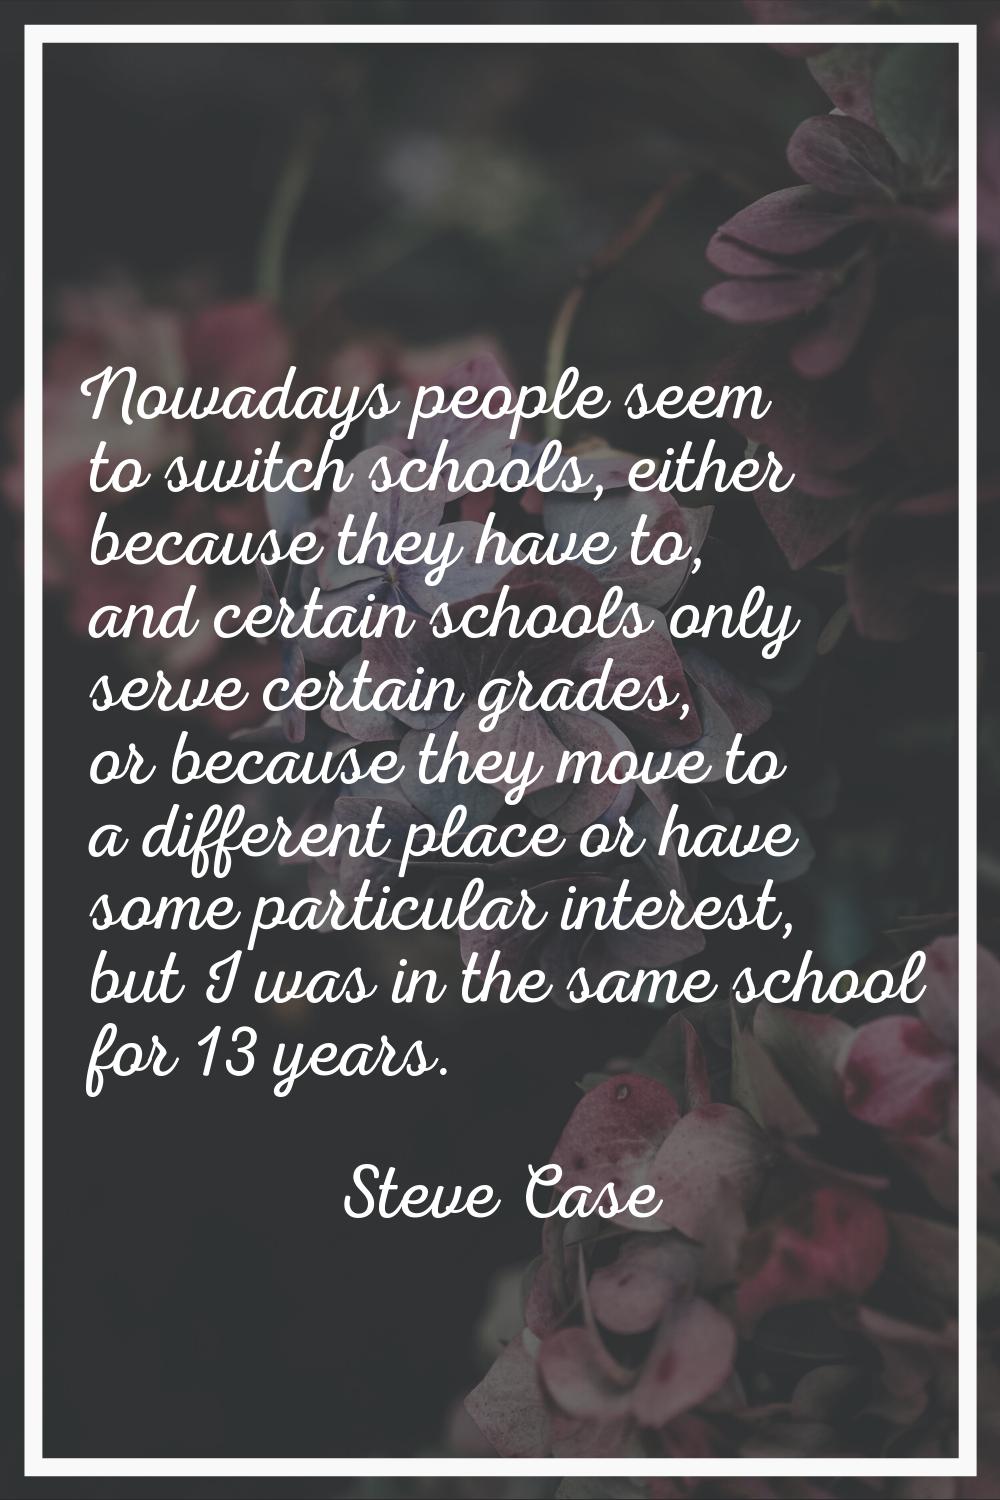 Nowadays people seem to switch schools, either because they have to, and certain schools only serve